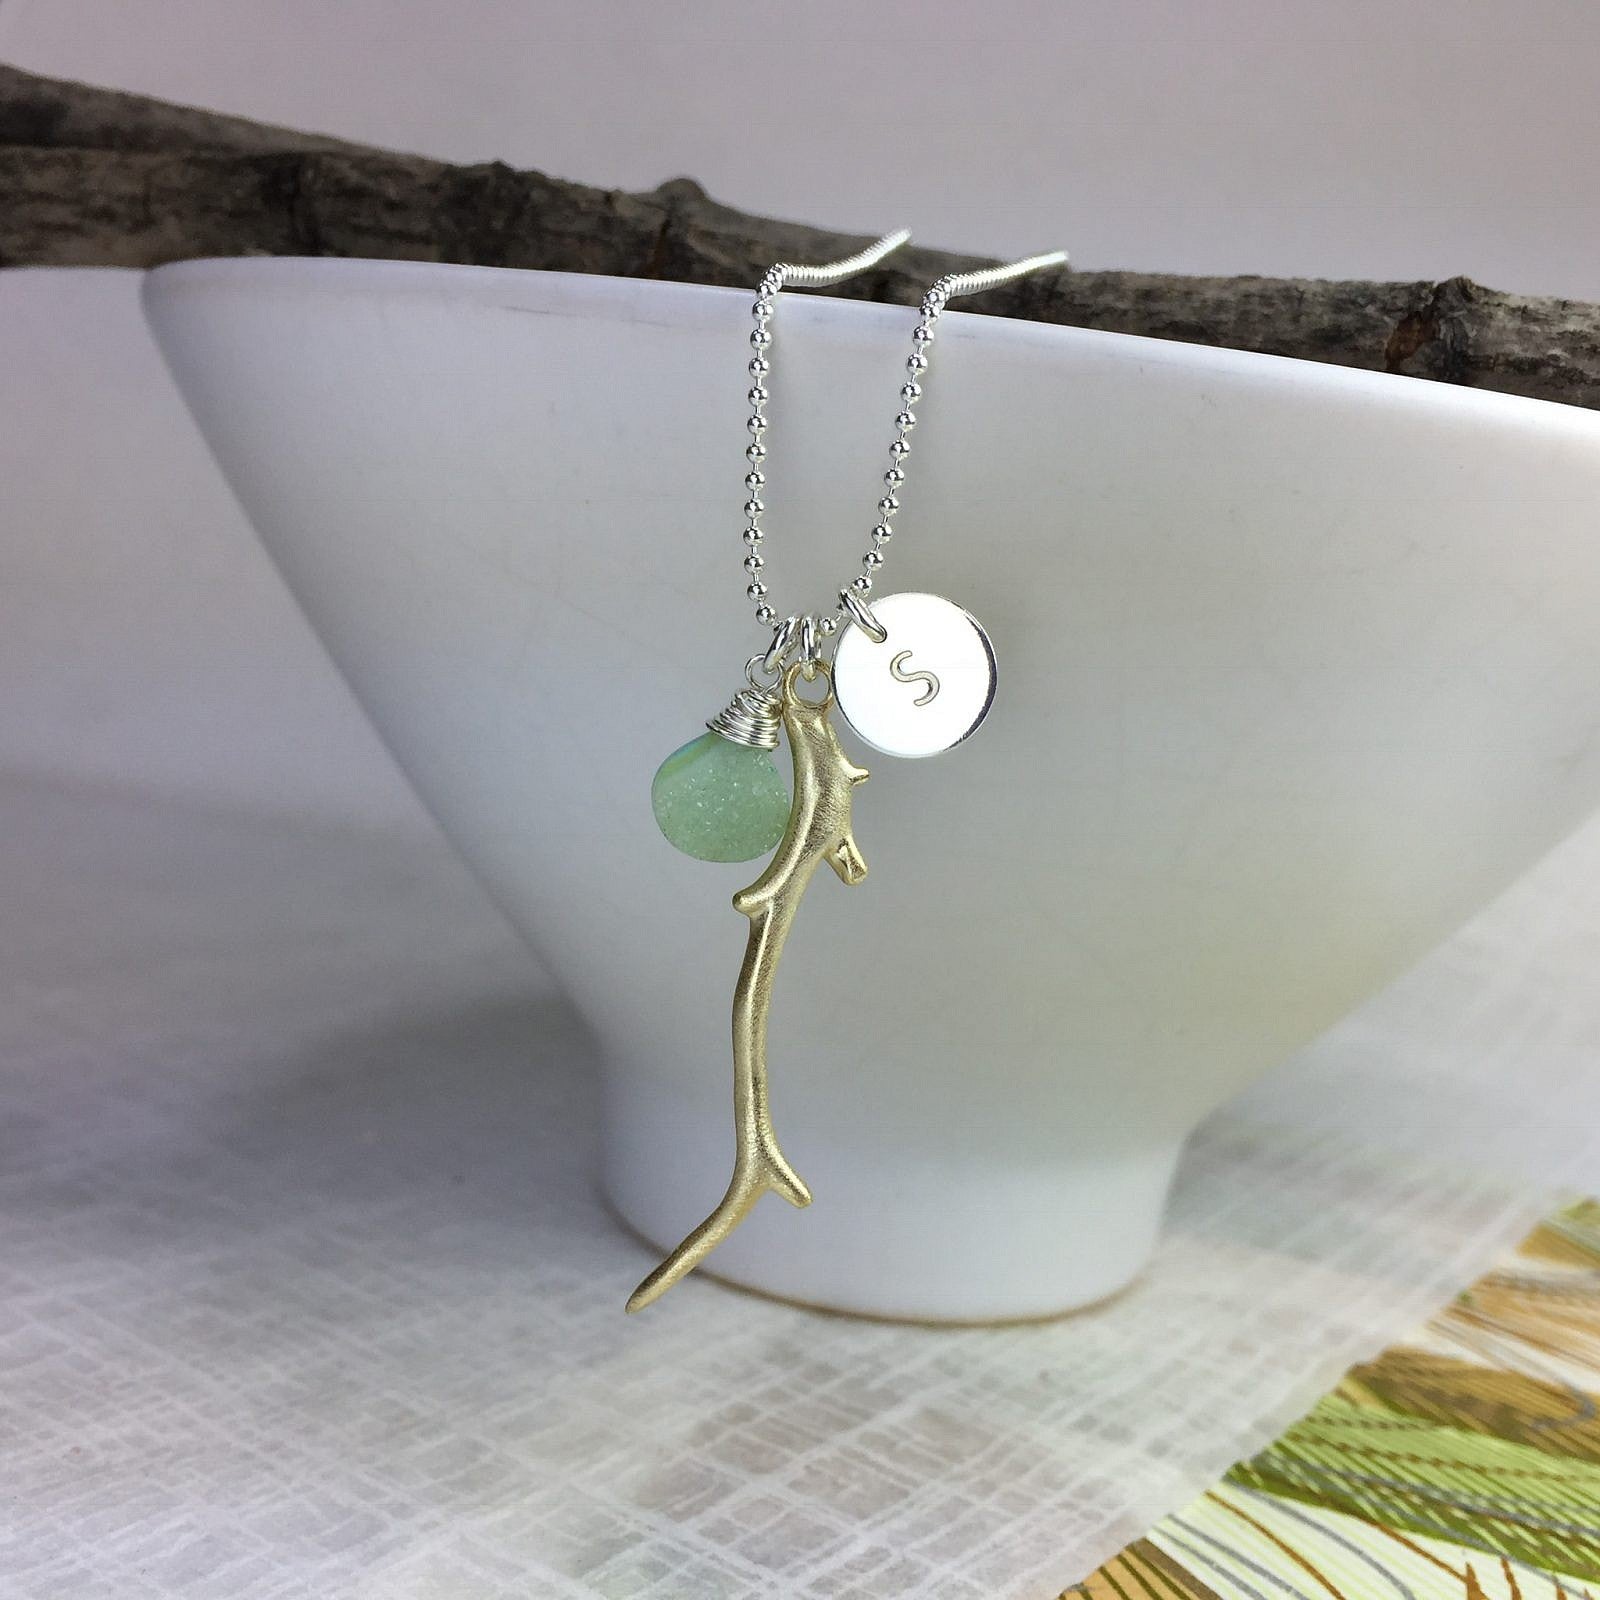 Lovely Branch Charm (2 Metal Options Available) - 1 pc.